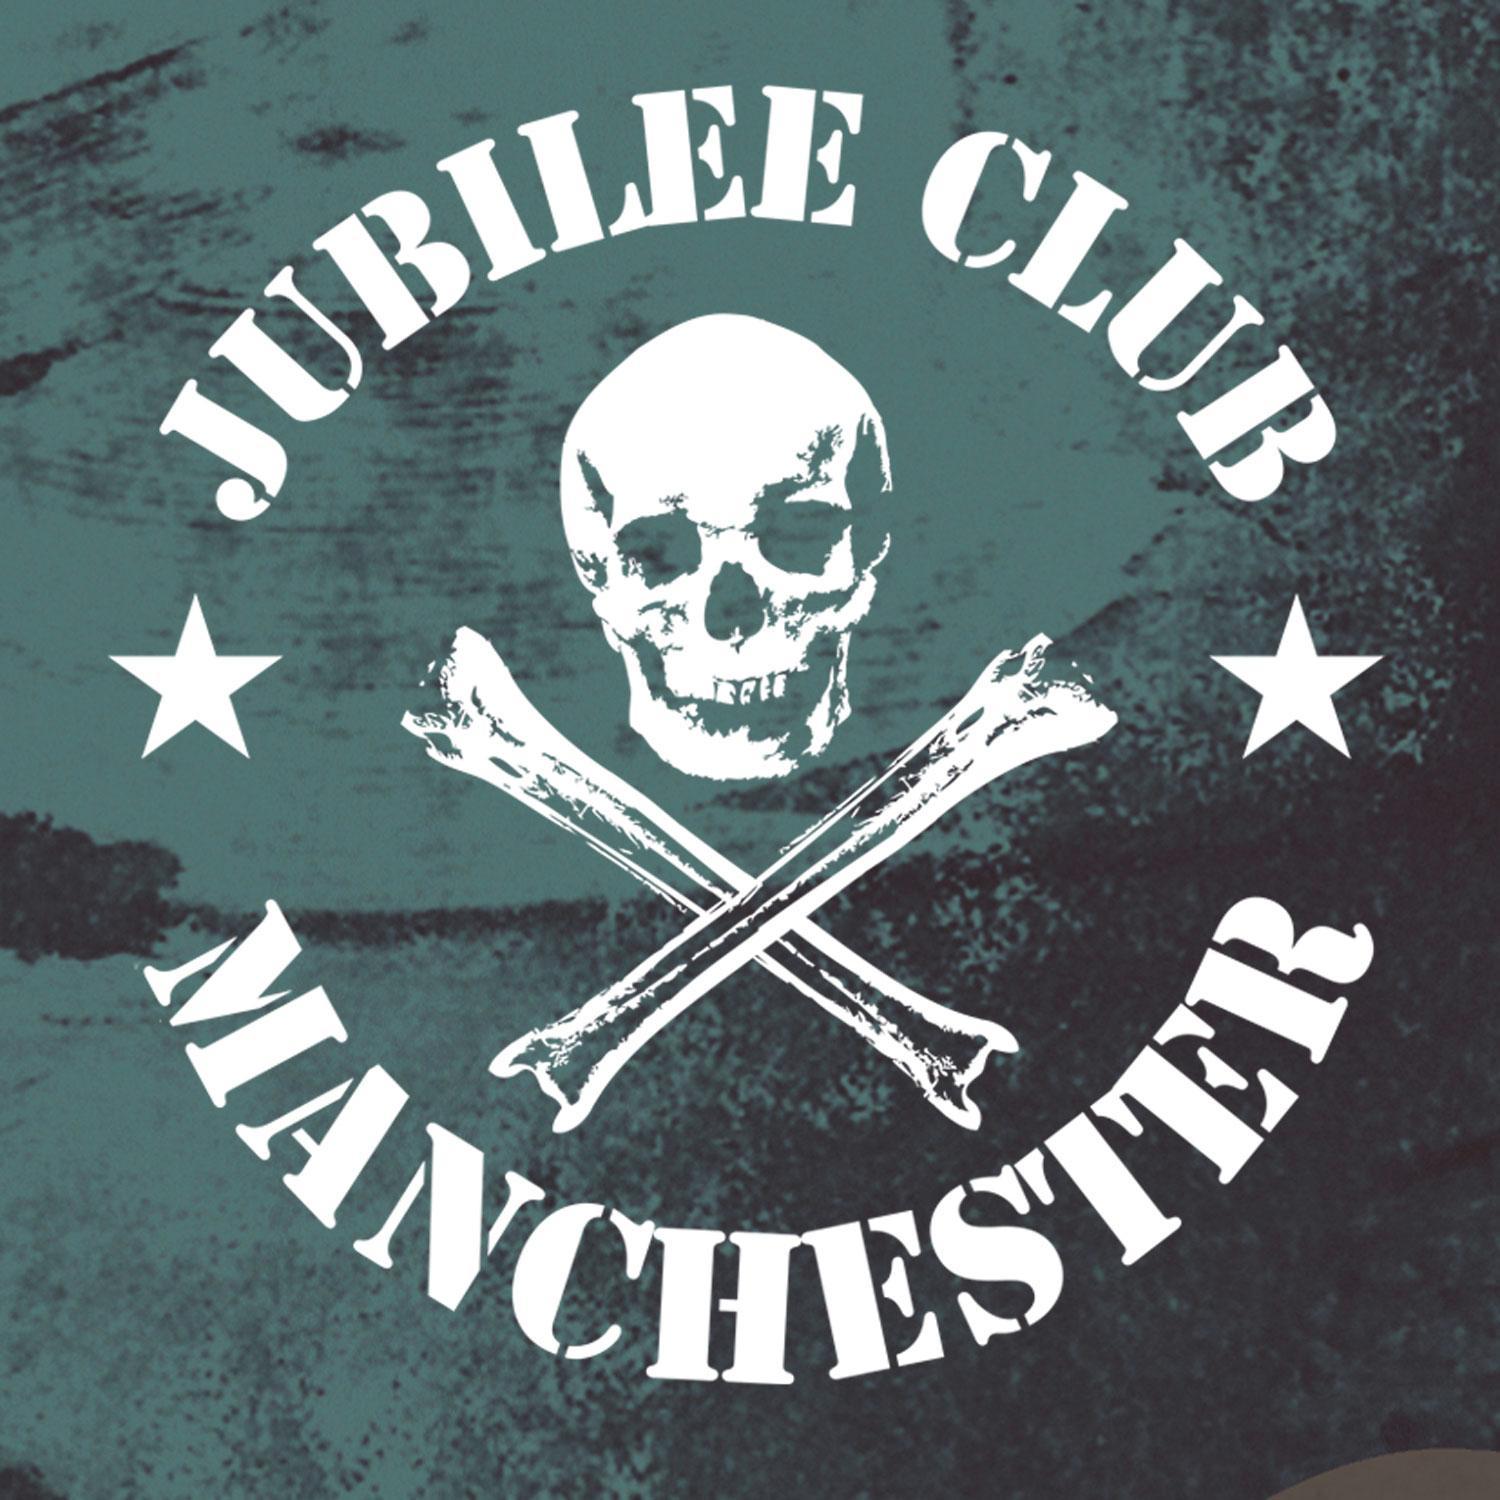 London's best Indie Rock'n'Roll club night has launched in Manchester at @TheRitzHQ ! Events at http://t.co/rwQlIs9ln1